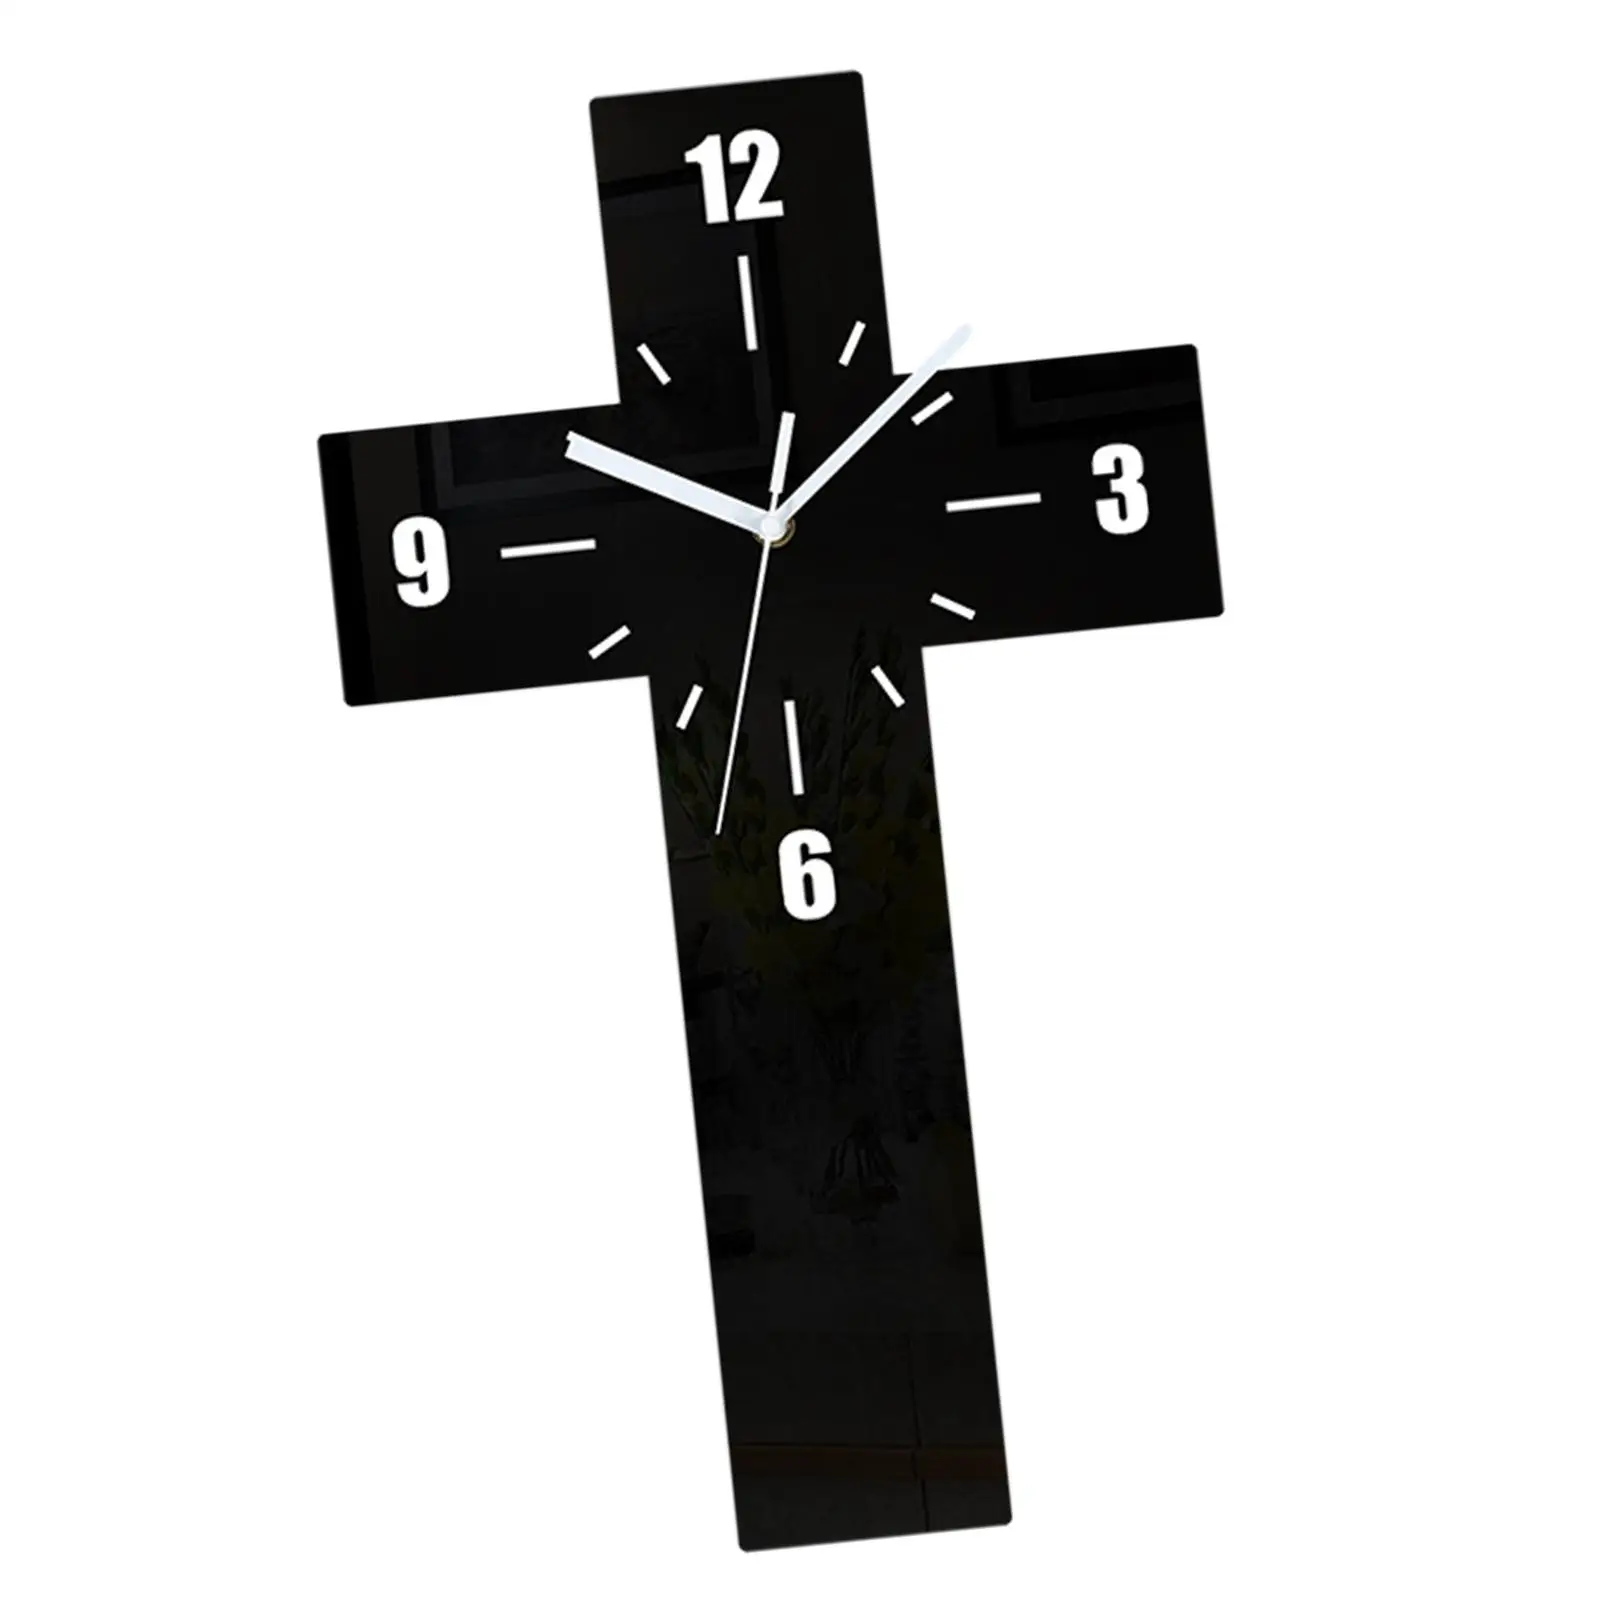 Modern Wall Clock Silent Simple Decor Accessory Decorative Clocks for Walls for Office Bathroom Classroom Living Room Kitchen